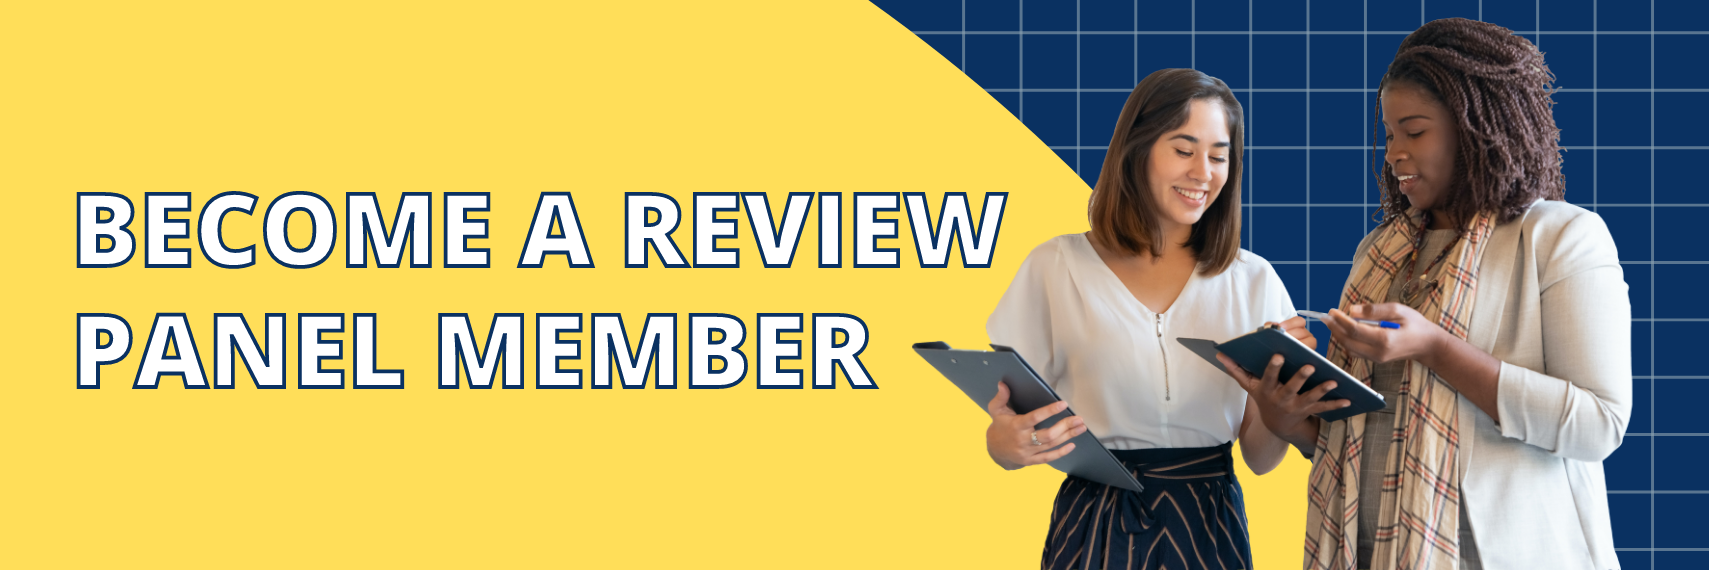 Become a Review Panel Member